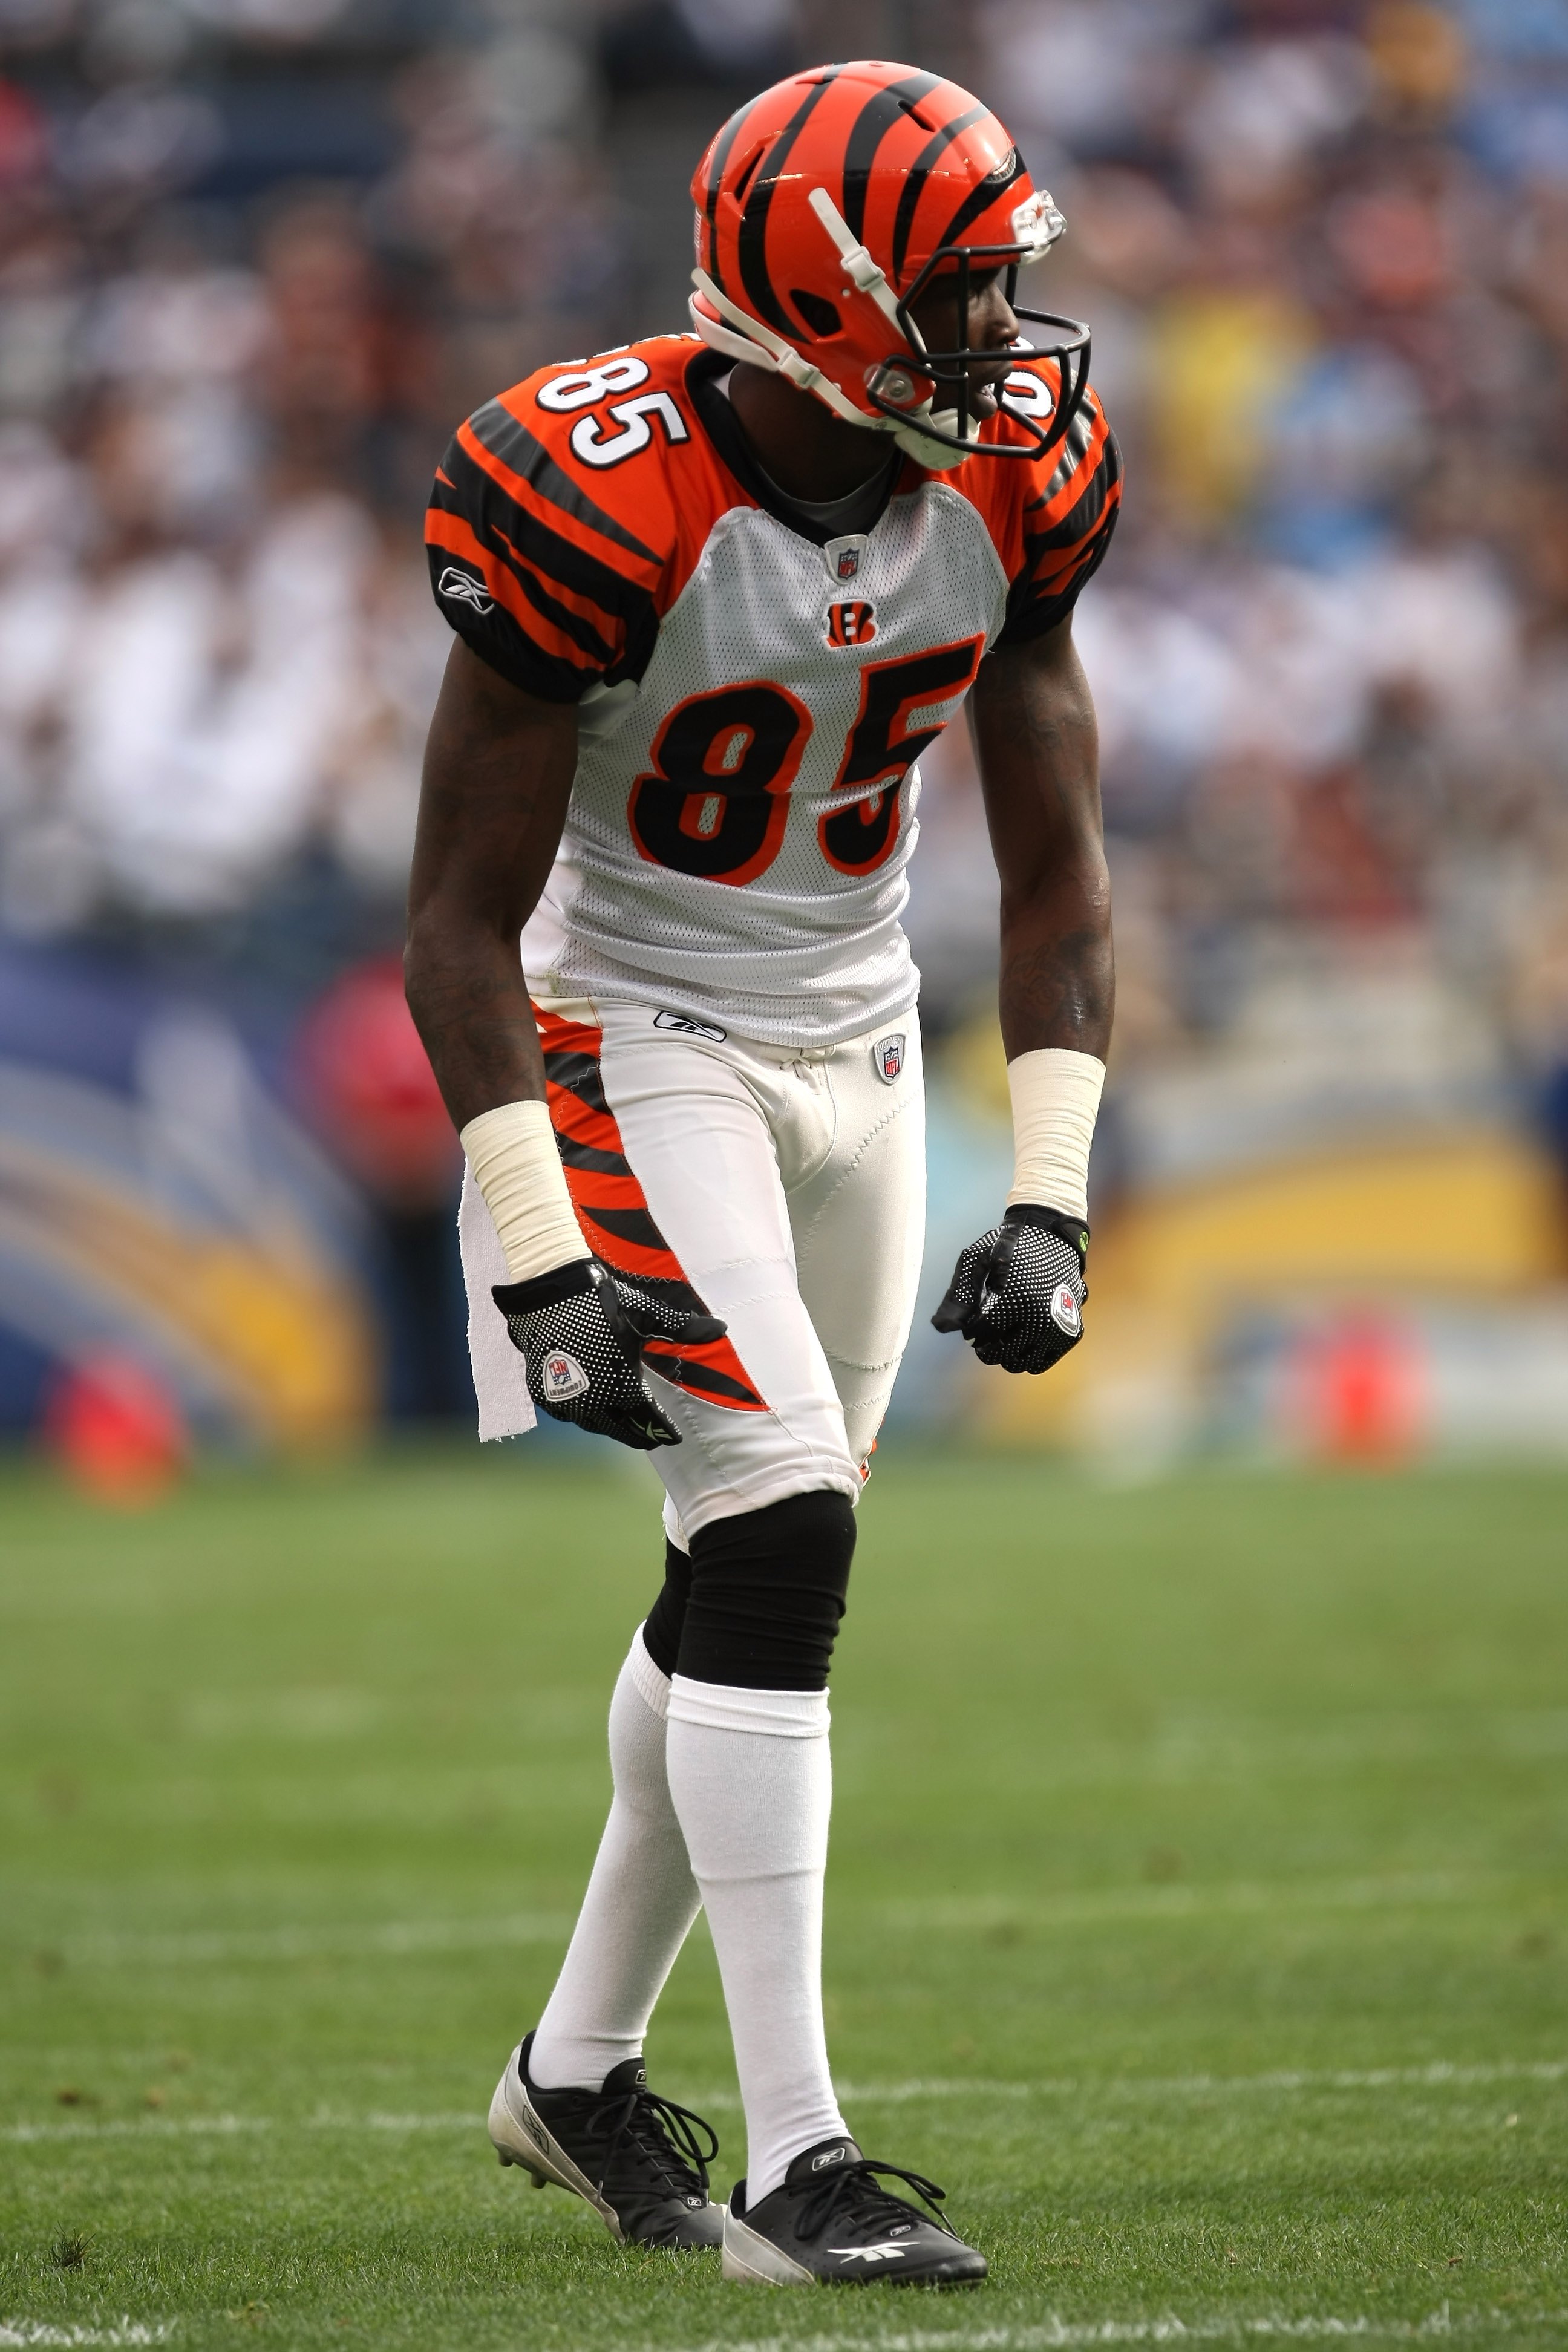 Terrell Owens and Chad Ochocinco: How They Rank Among NFL's Top WR